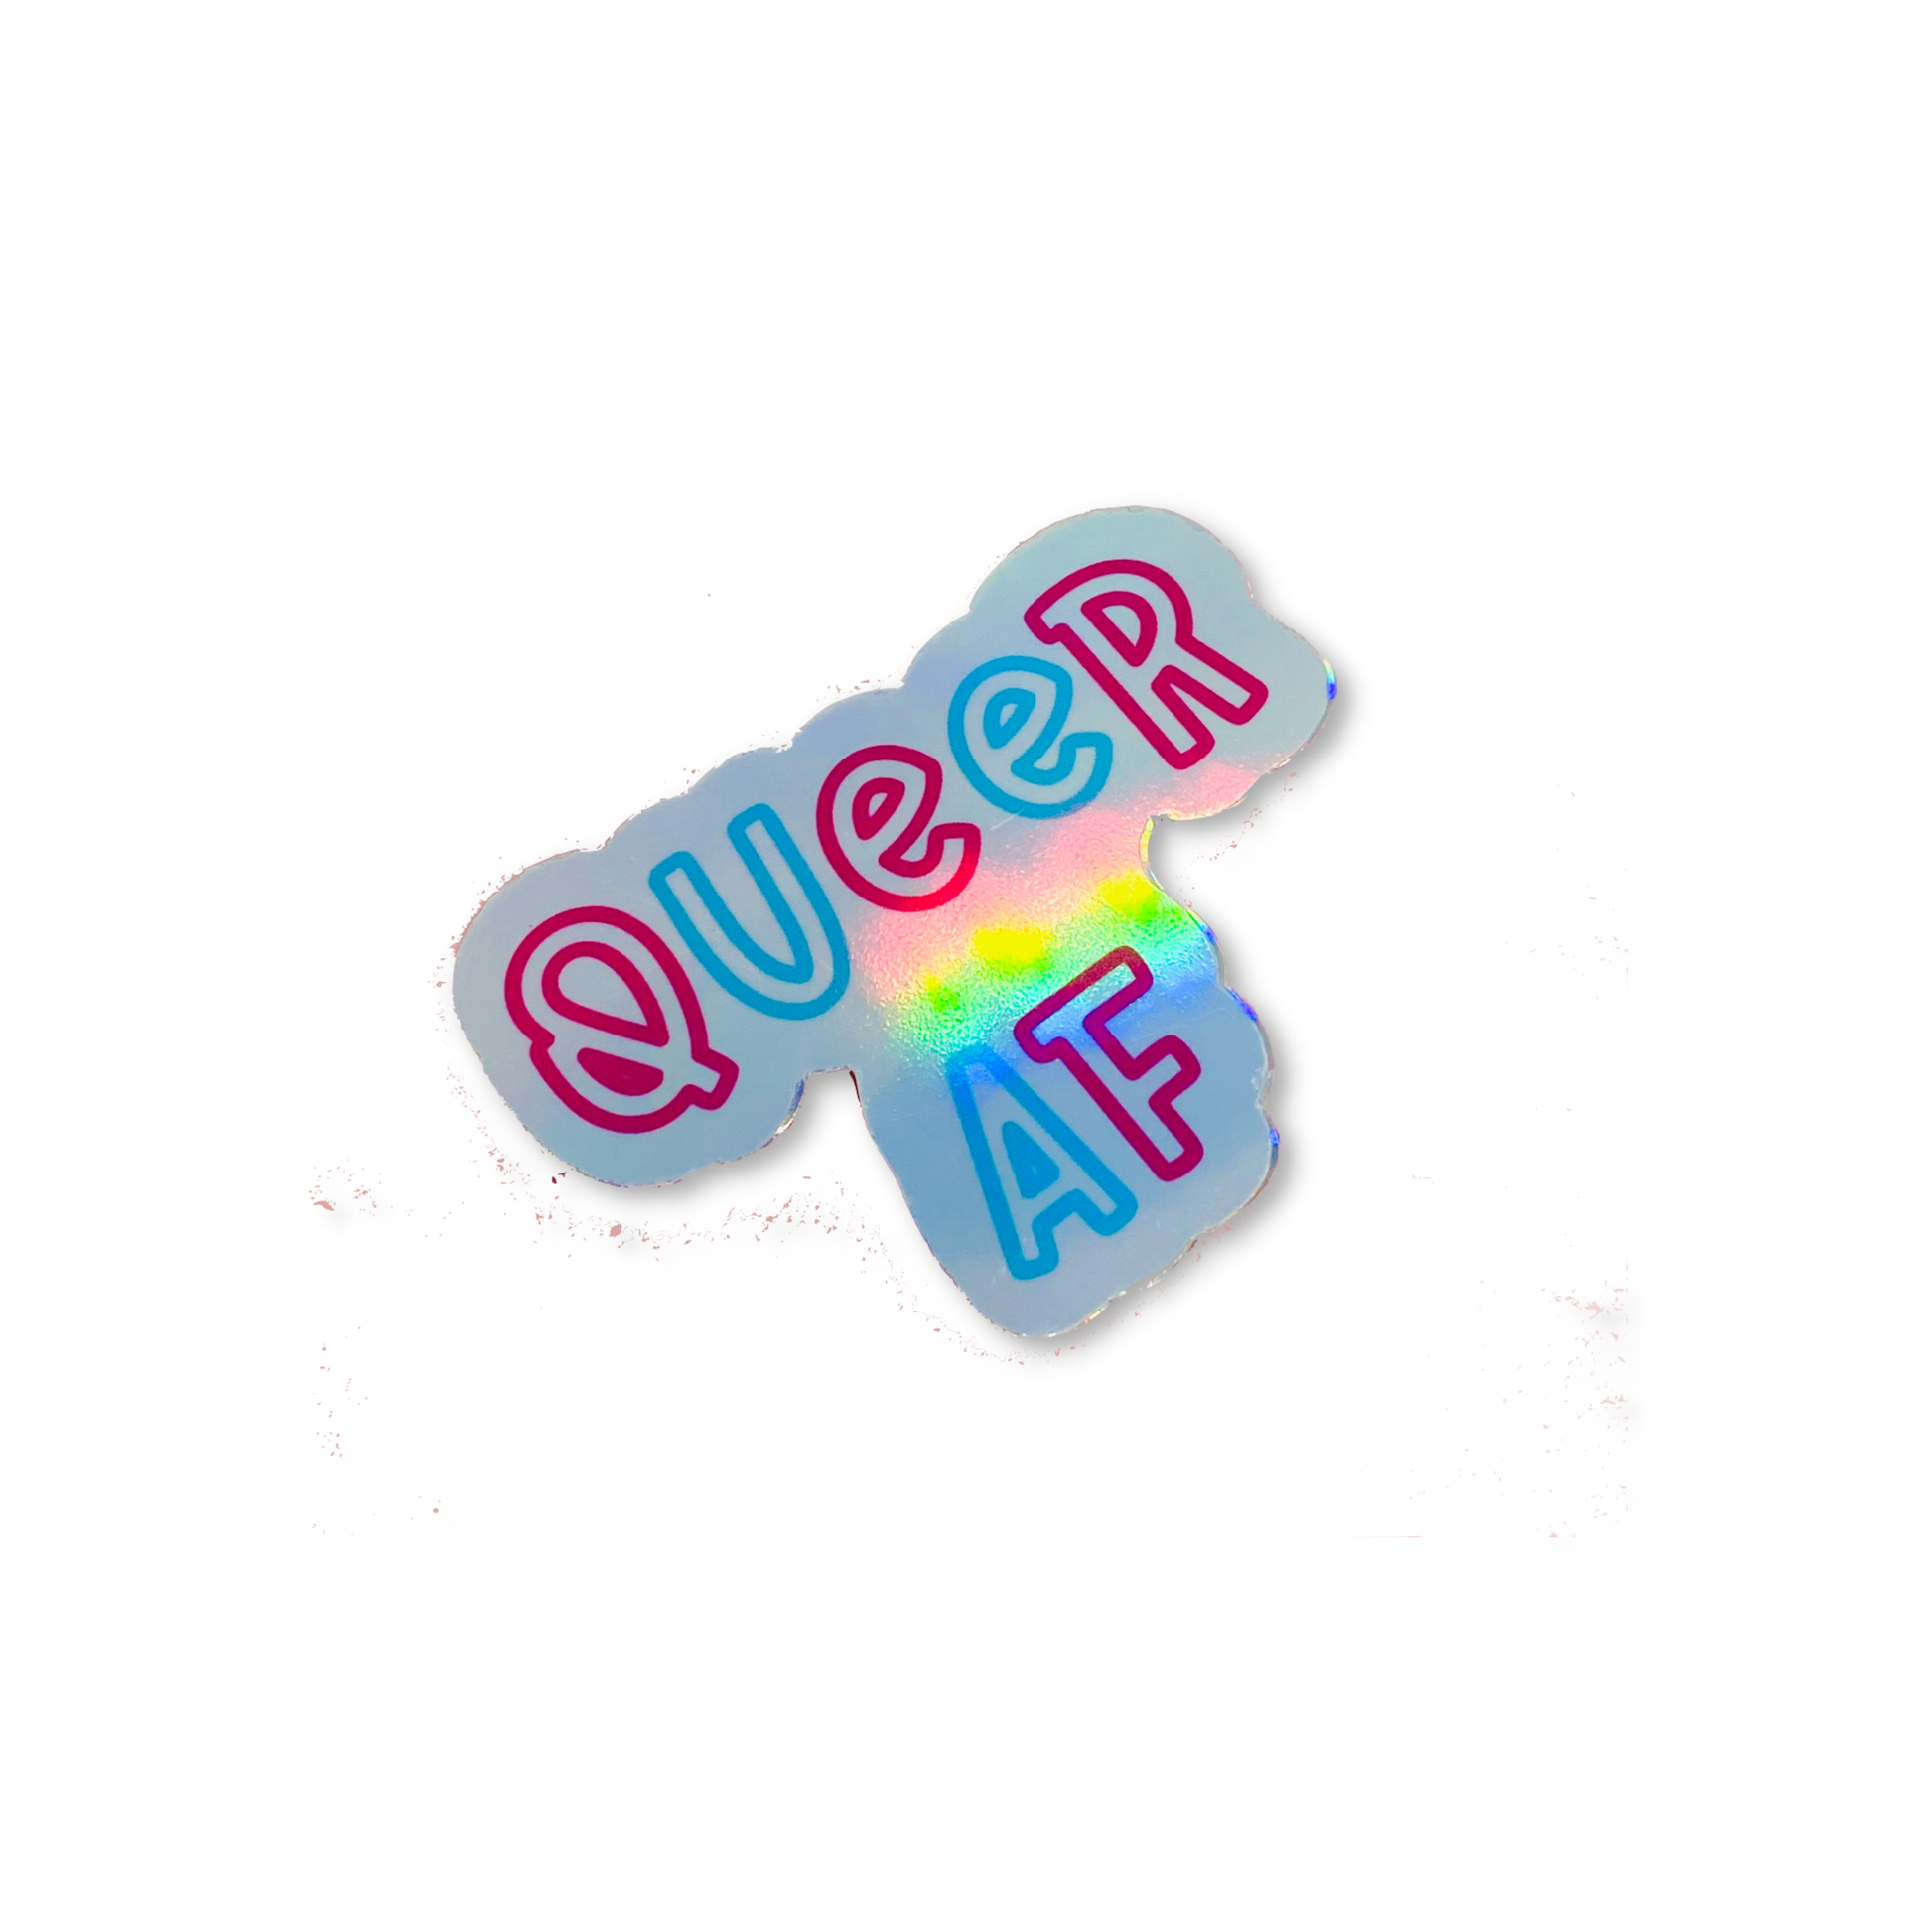 Queer AF Holographic Vinyl Sticker Home Goods Fluffmallow   